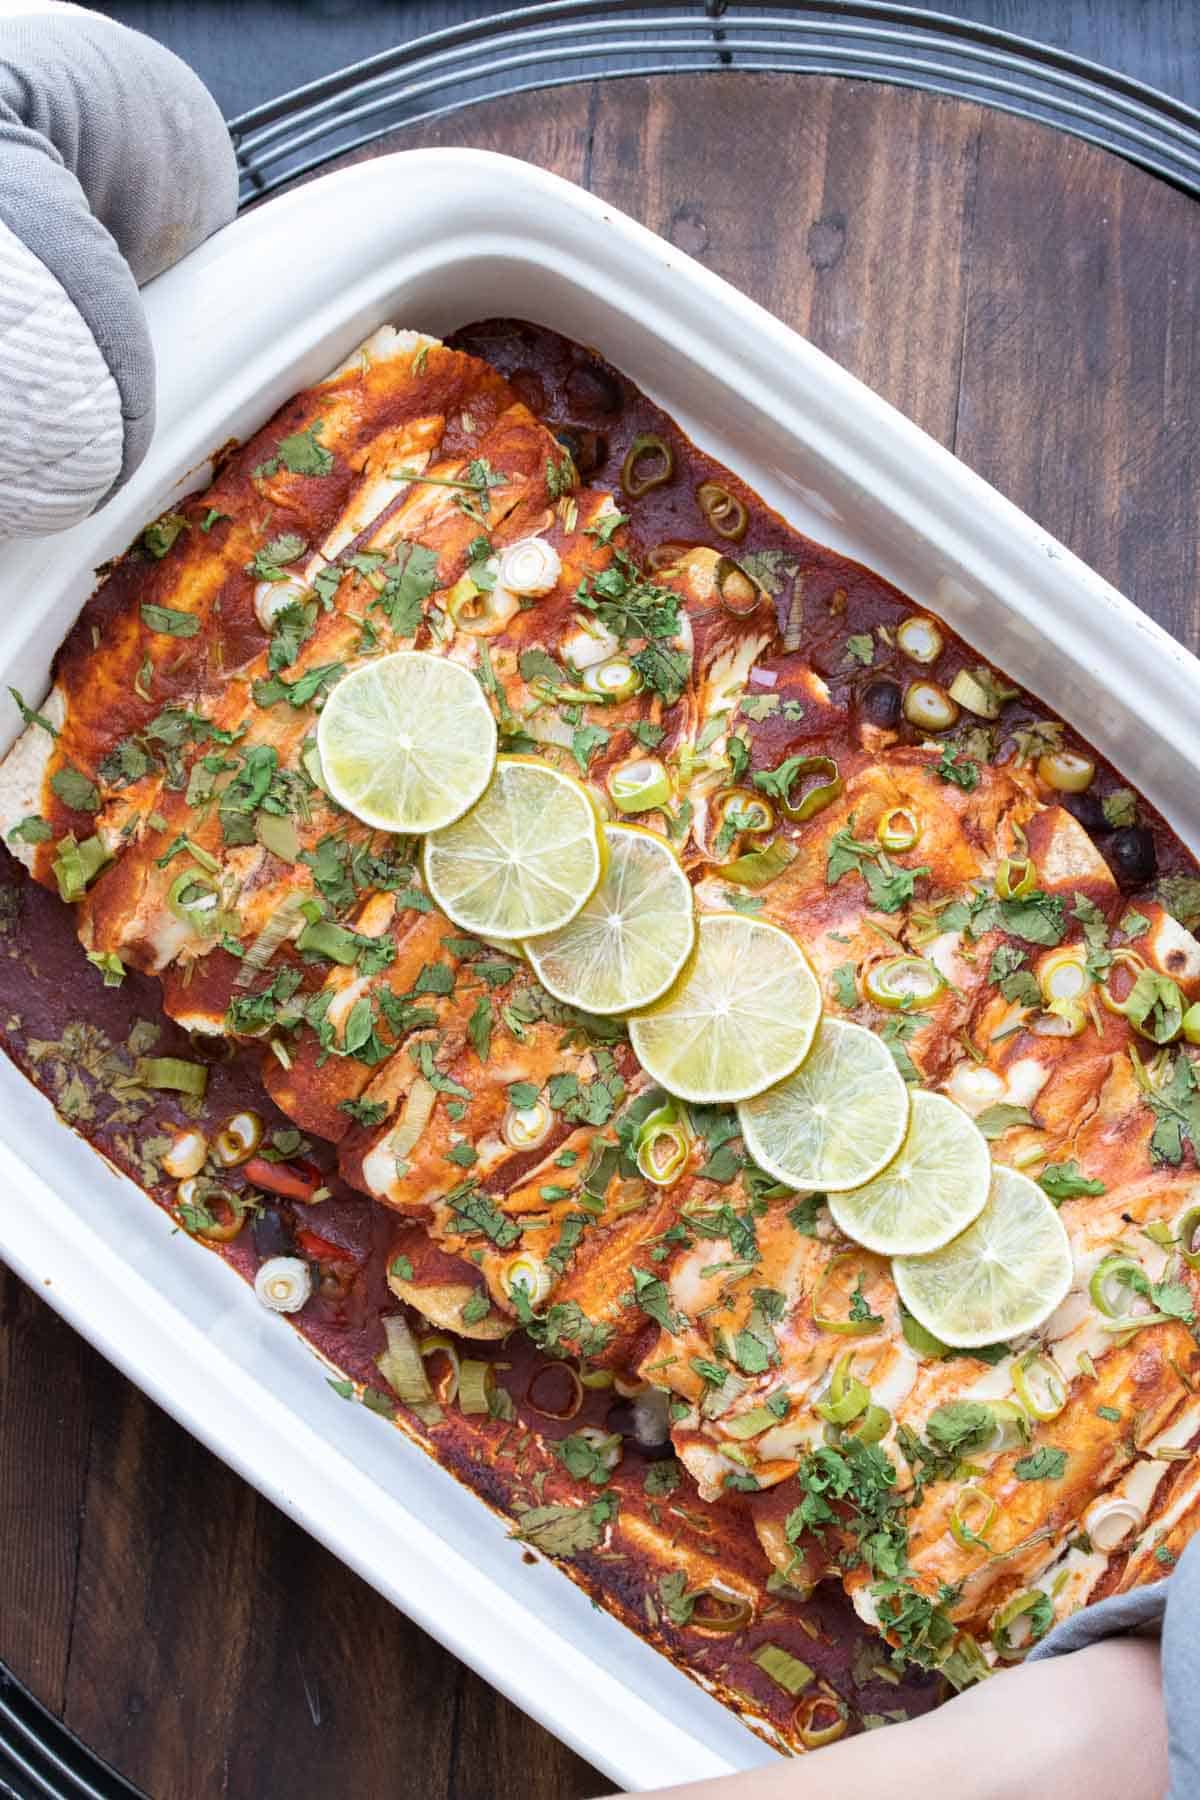 Baked enchiladas with red sauce topped with green onions and limes.